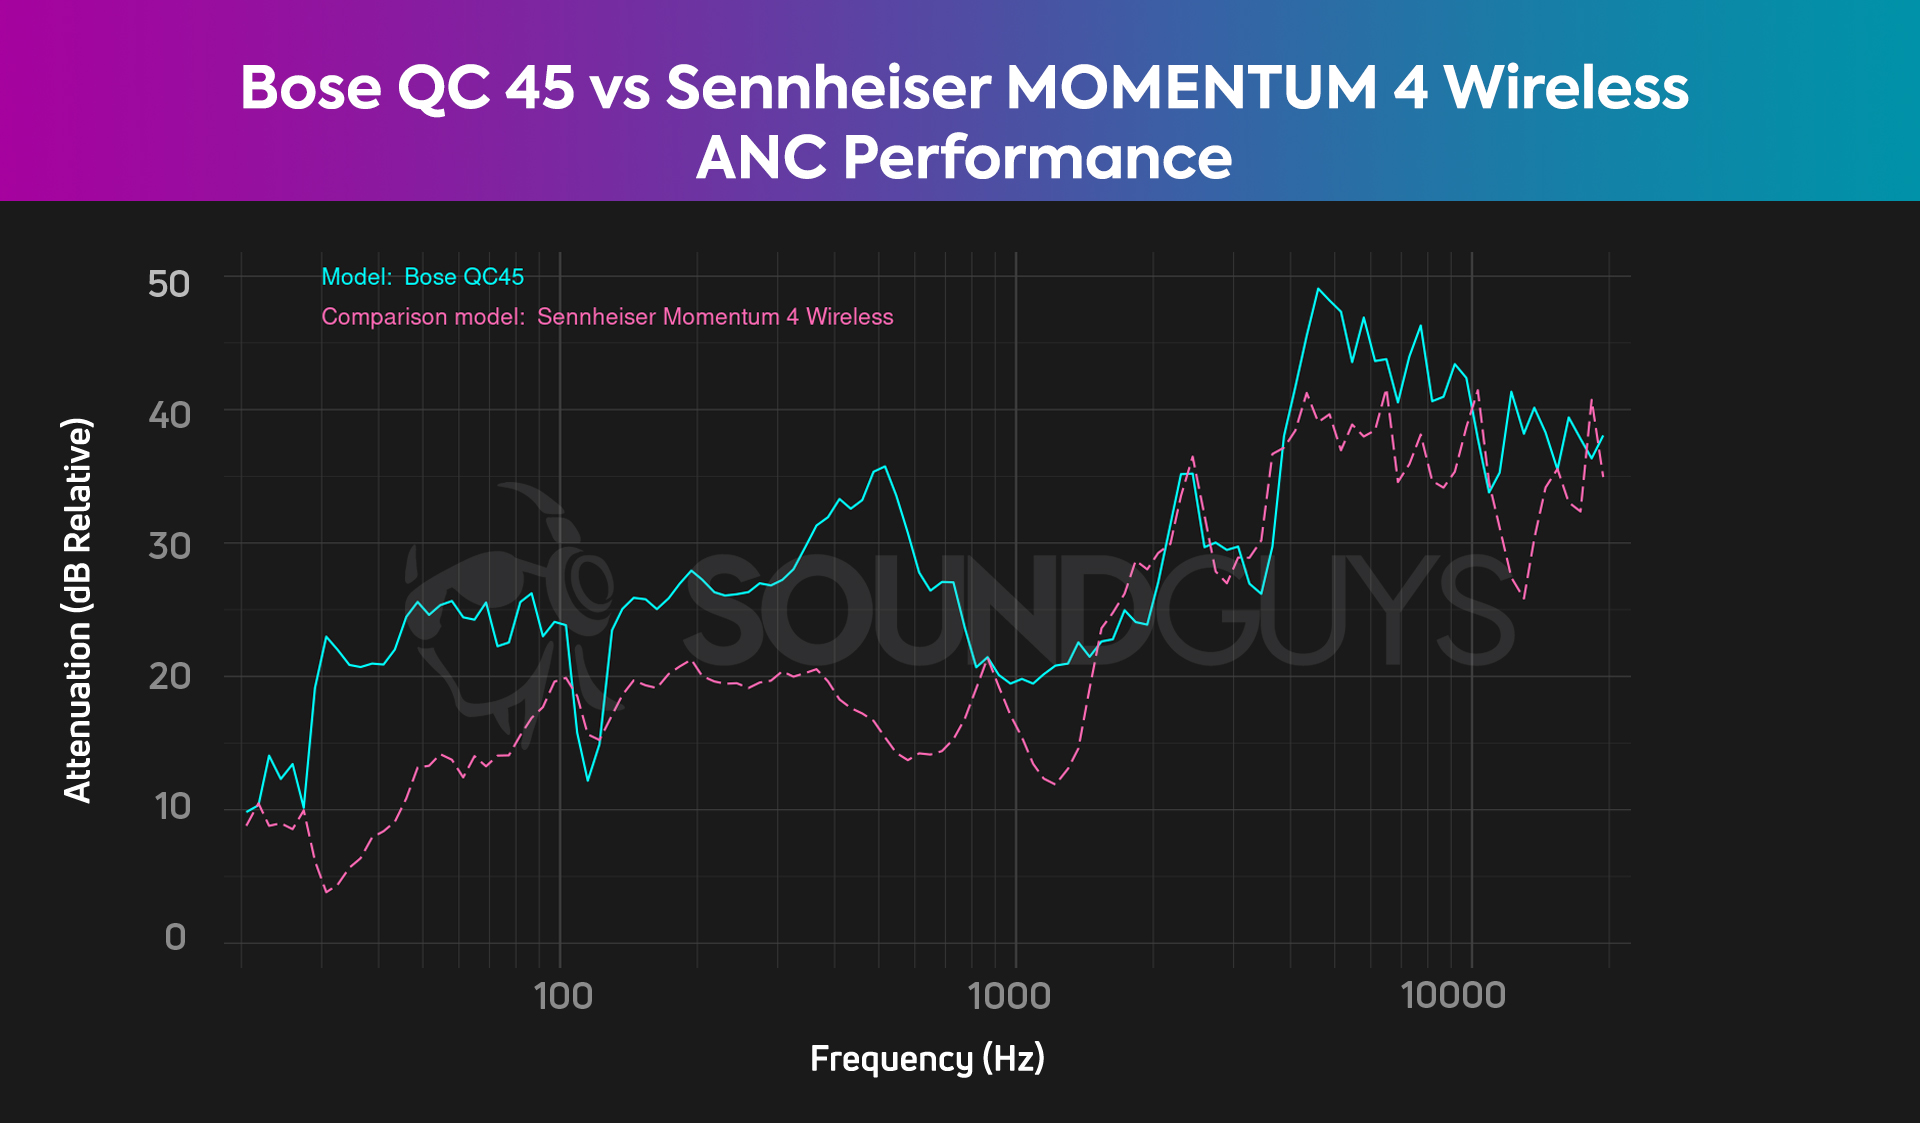 The active noise canceling comparison chart for the Bose QuietComfort 45 vs Sennheiser MOMENTUM 4 Wireless, showing superior ANC from the Bose QuietComfort 45.